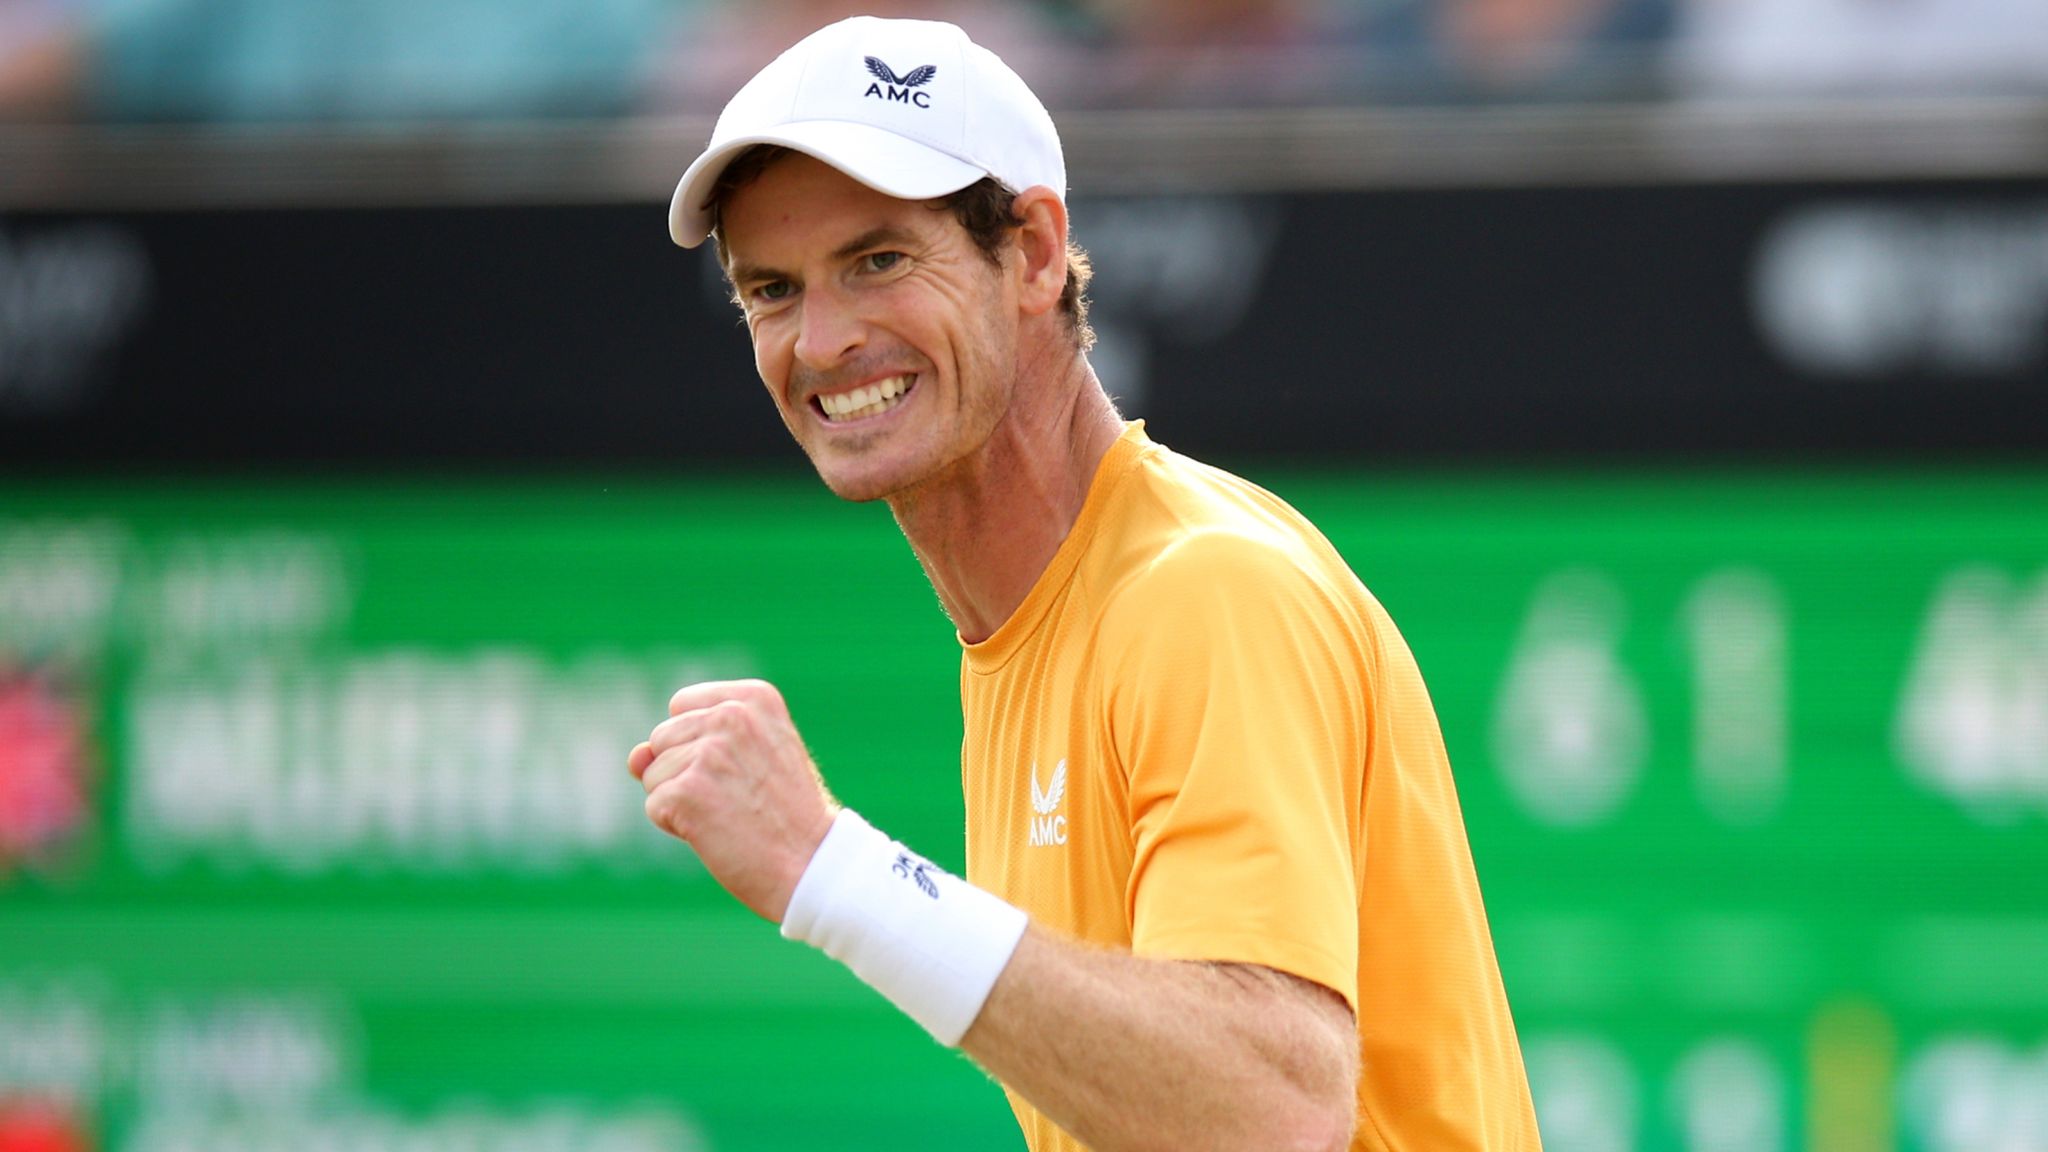 Andy Murray Former two-time Wimbledon champion charges into Nottingham Open final Tennis News Sky Sports